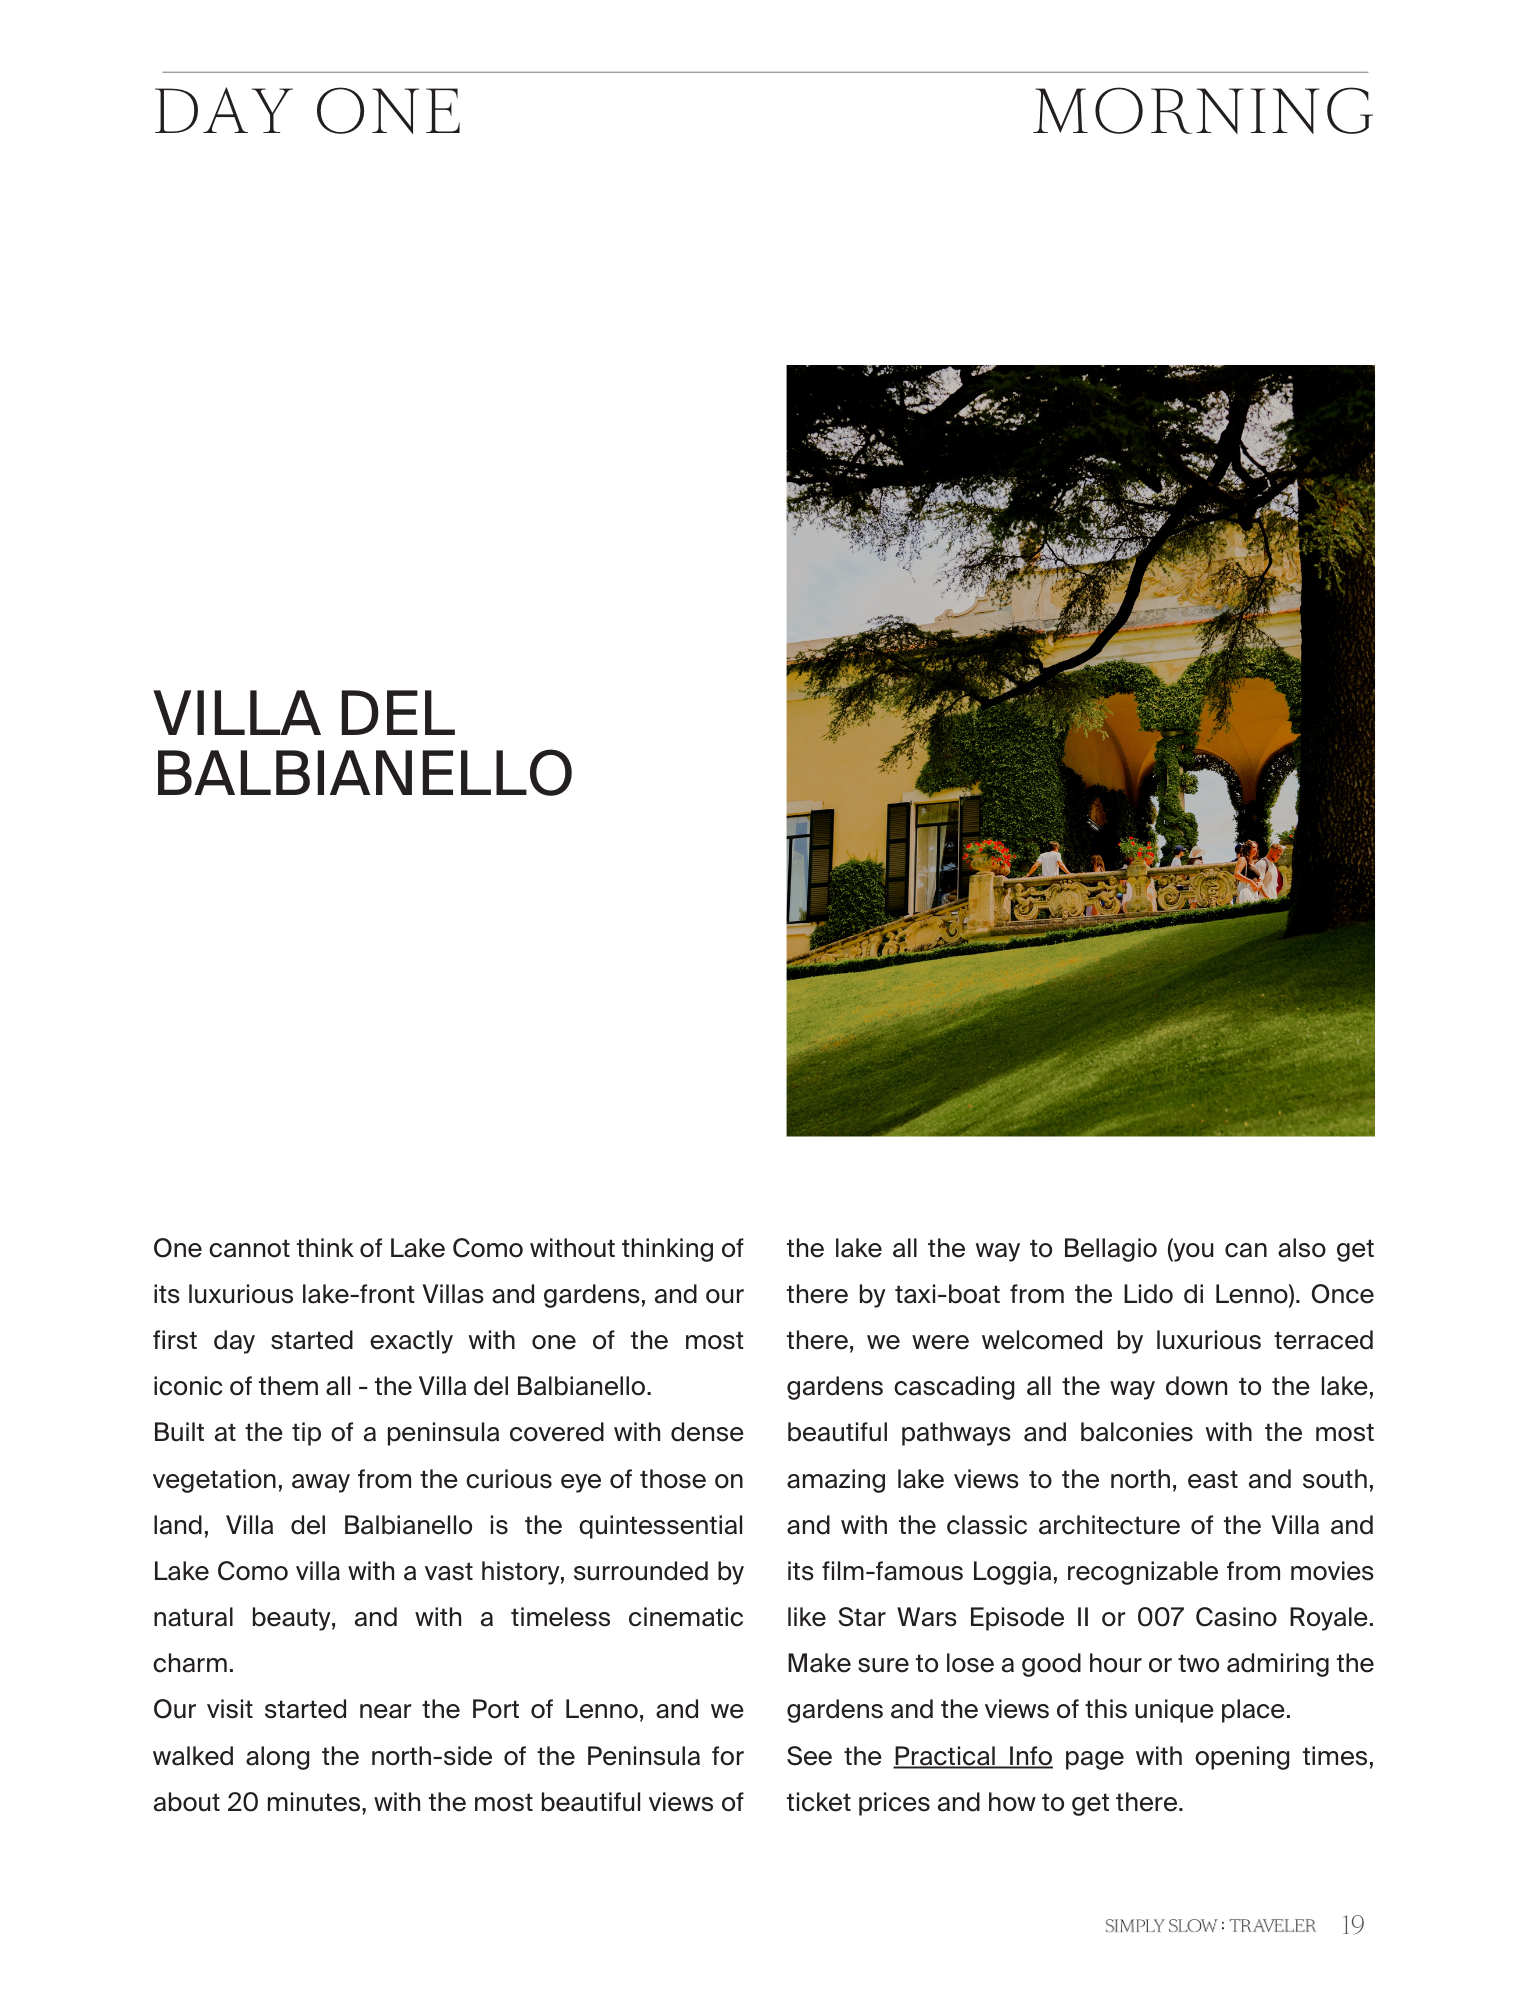 A Guide to Lake Como - page dedicated to a visit to Villa Del Balbianello, by Simply Slow Traveler